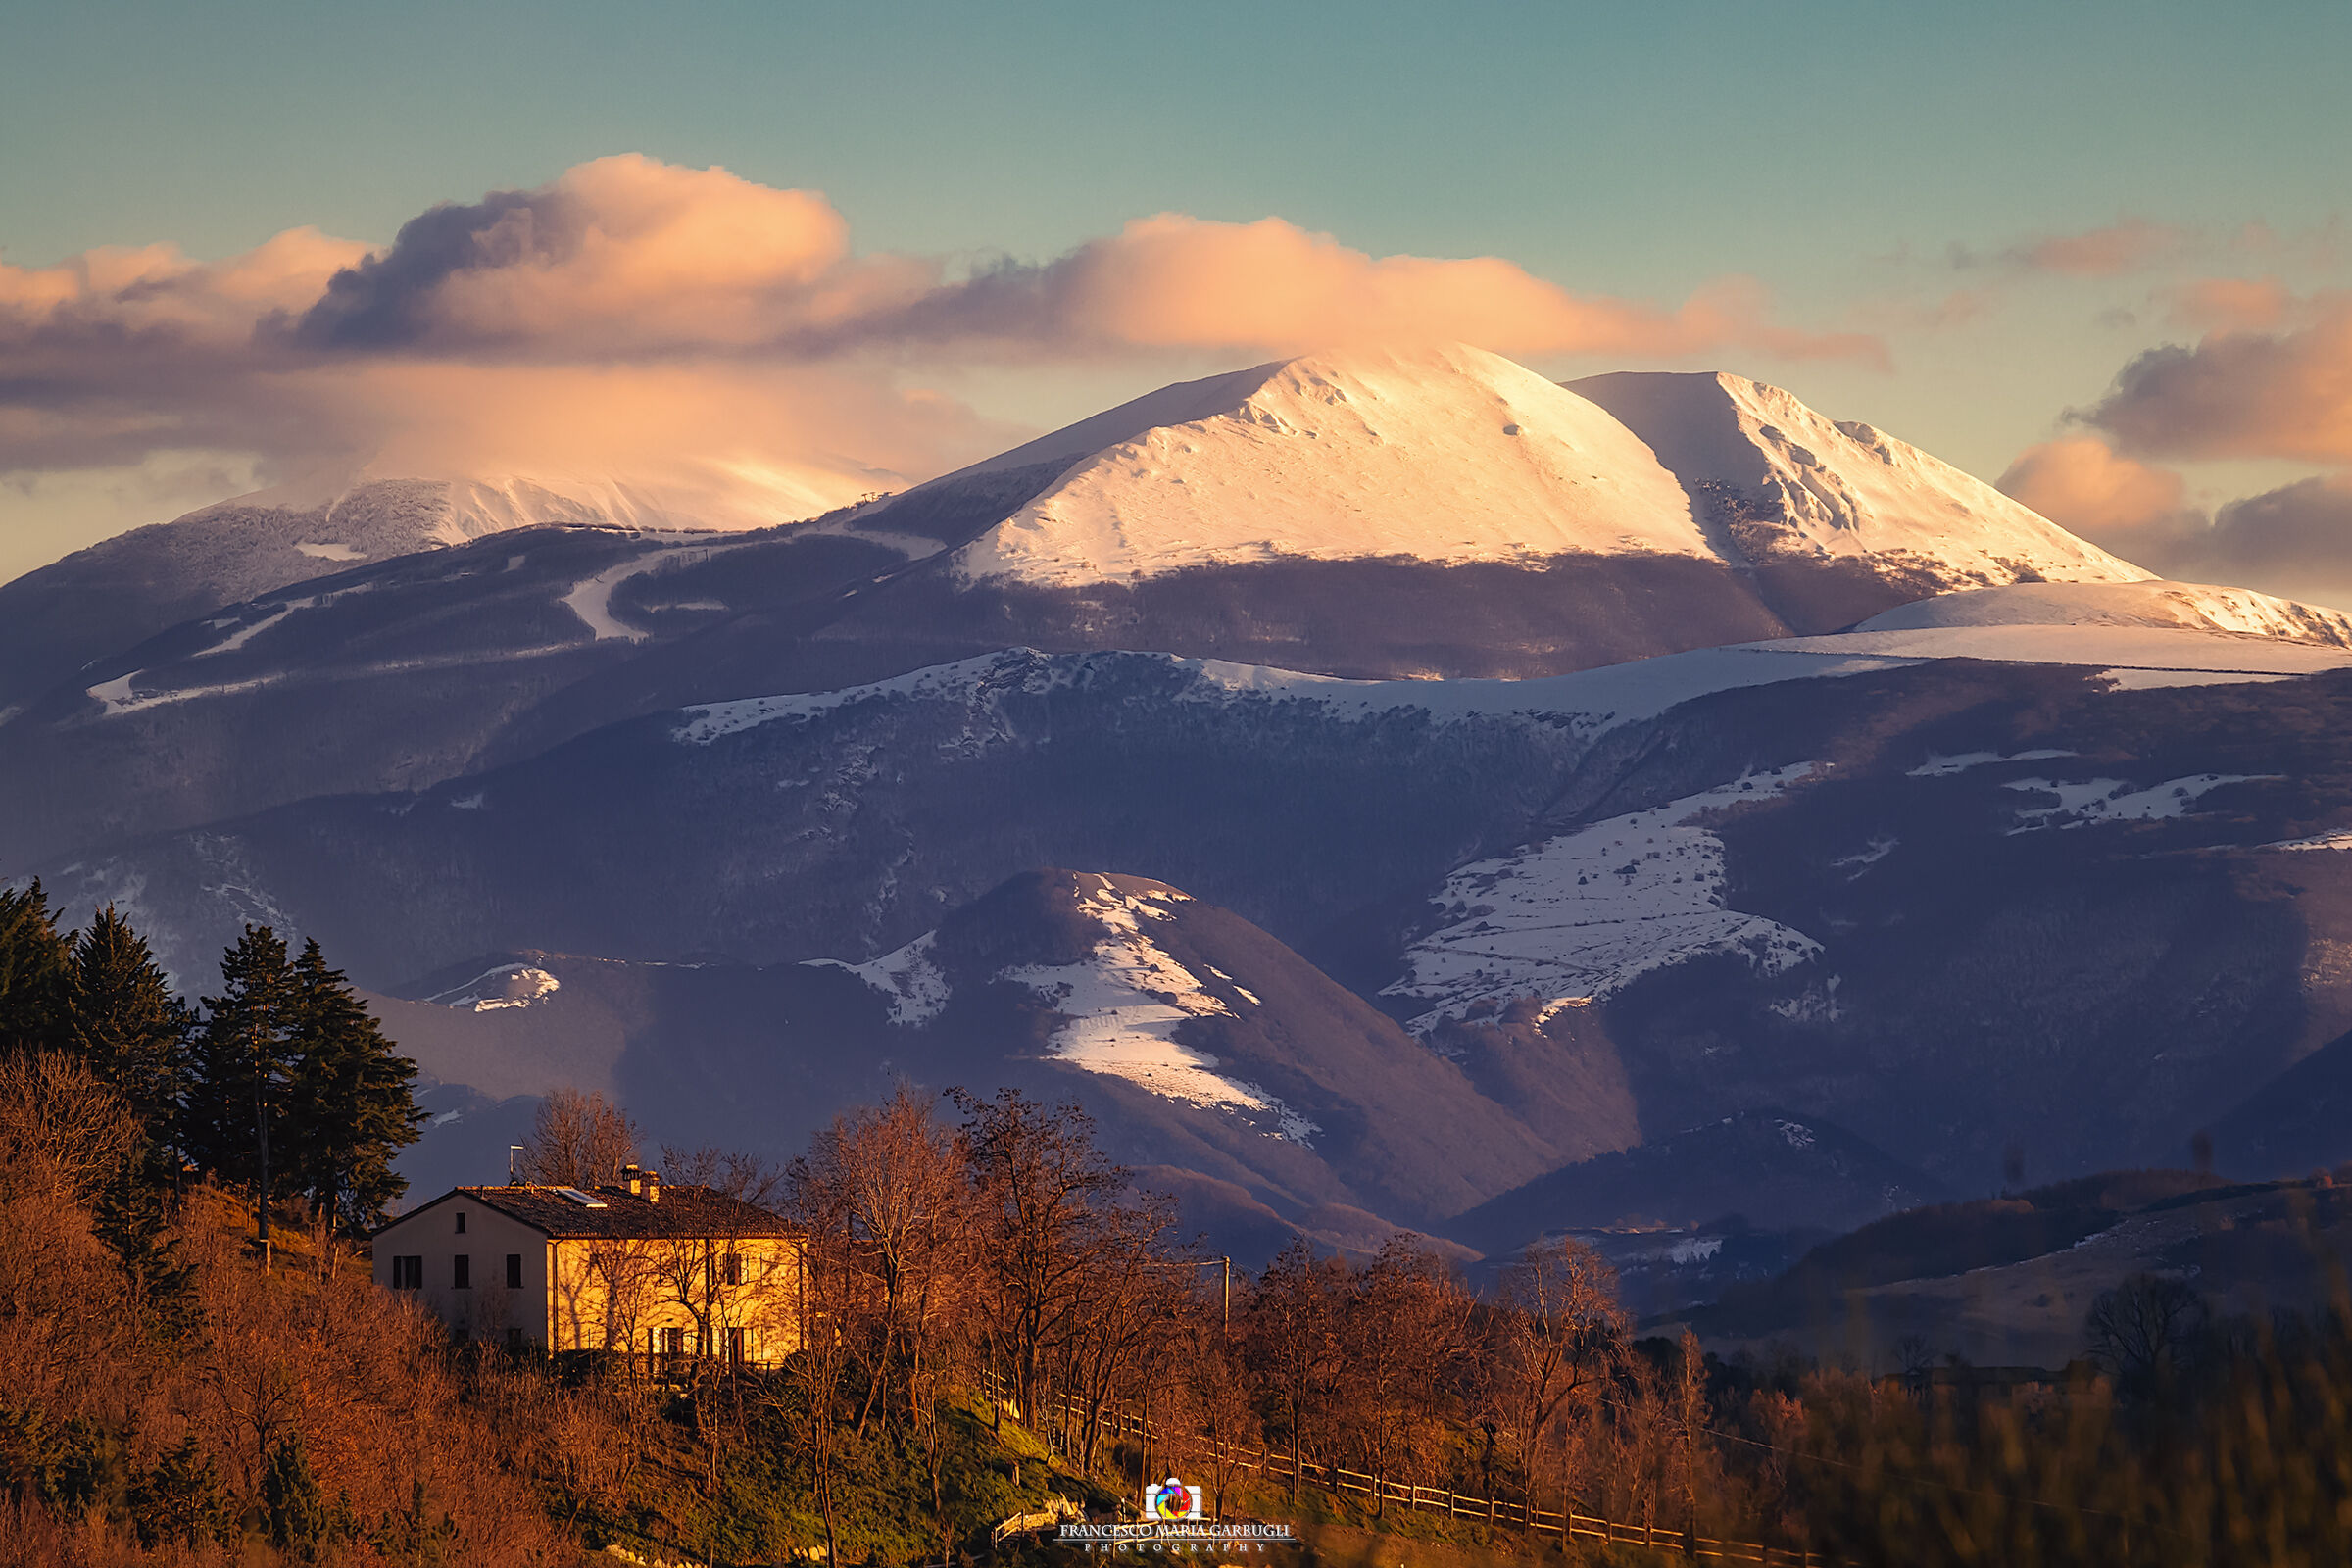 Farmhouse at sunset and snow-capped peaks...